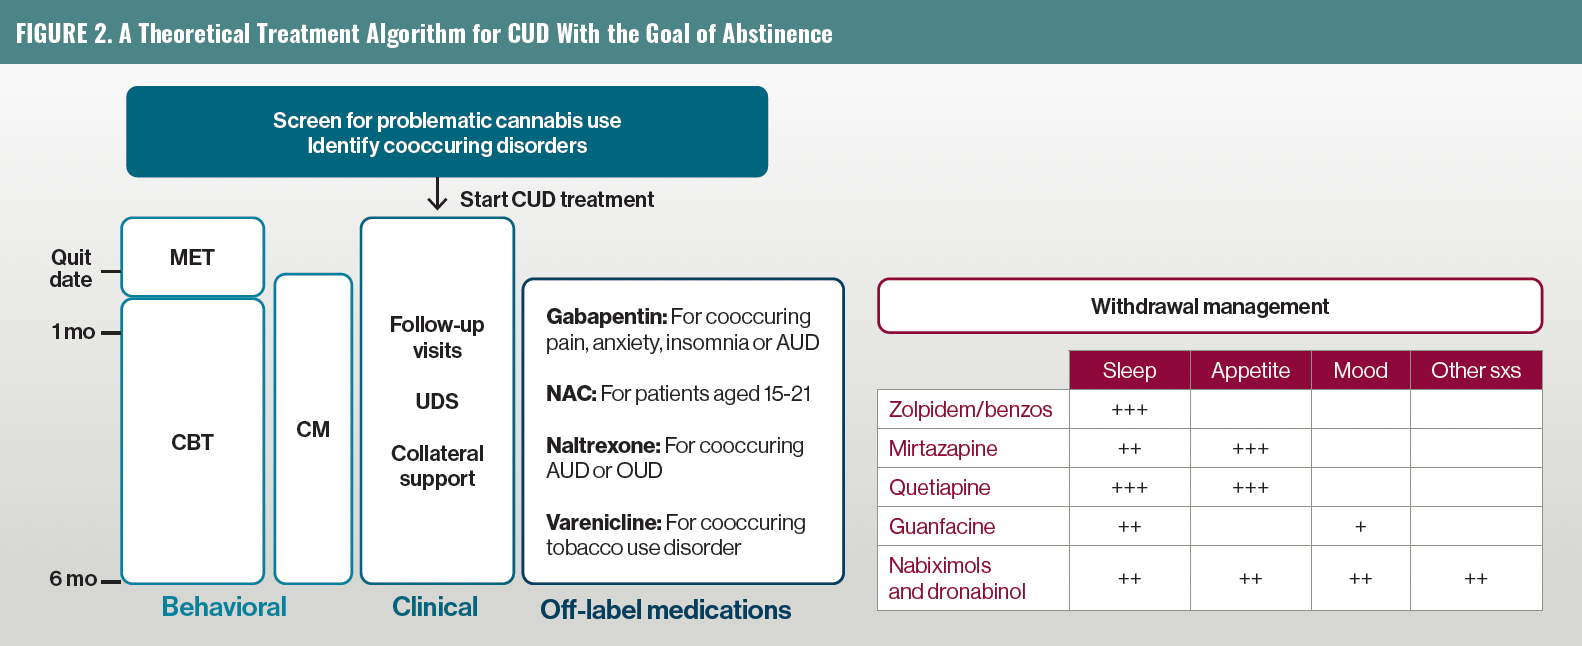 FIGURE 2. A Theoretical Treatment Algorithm for CUD With the Goal of Abstinence